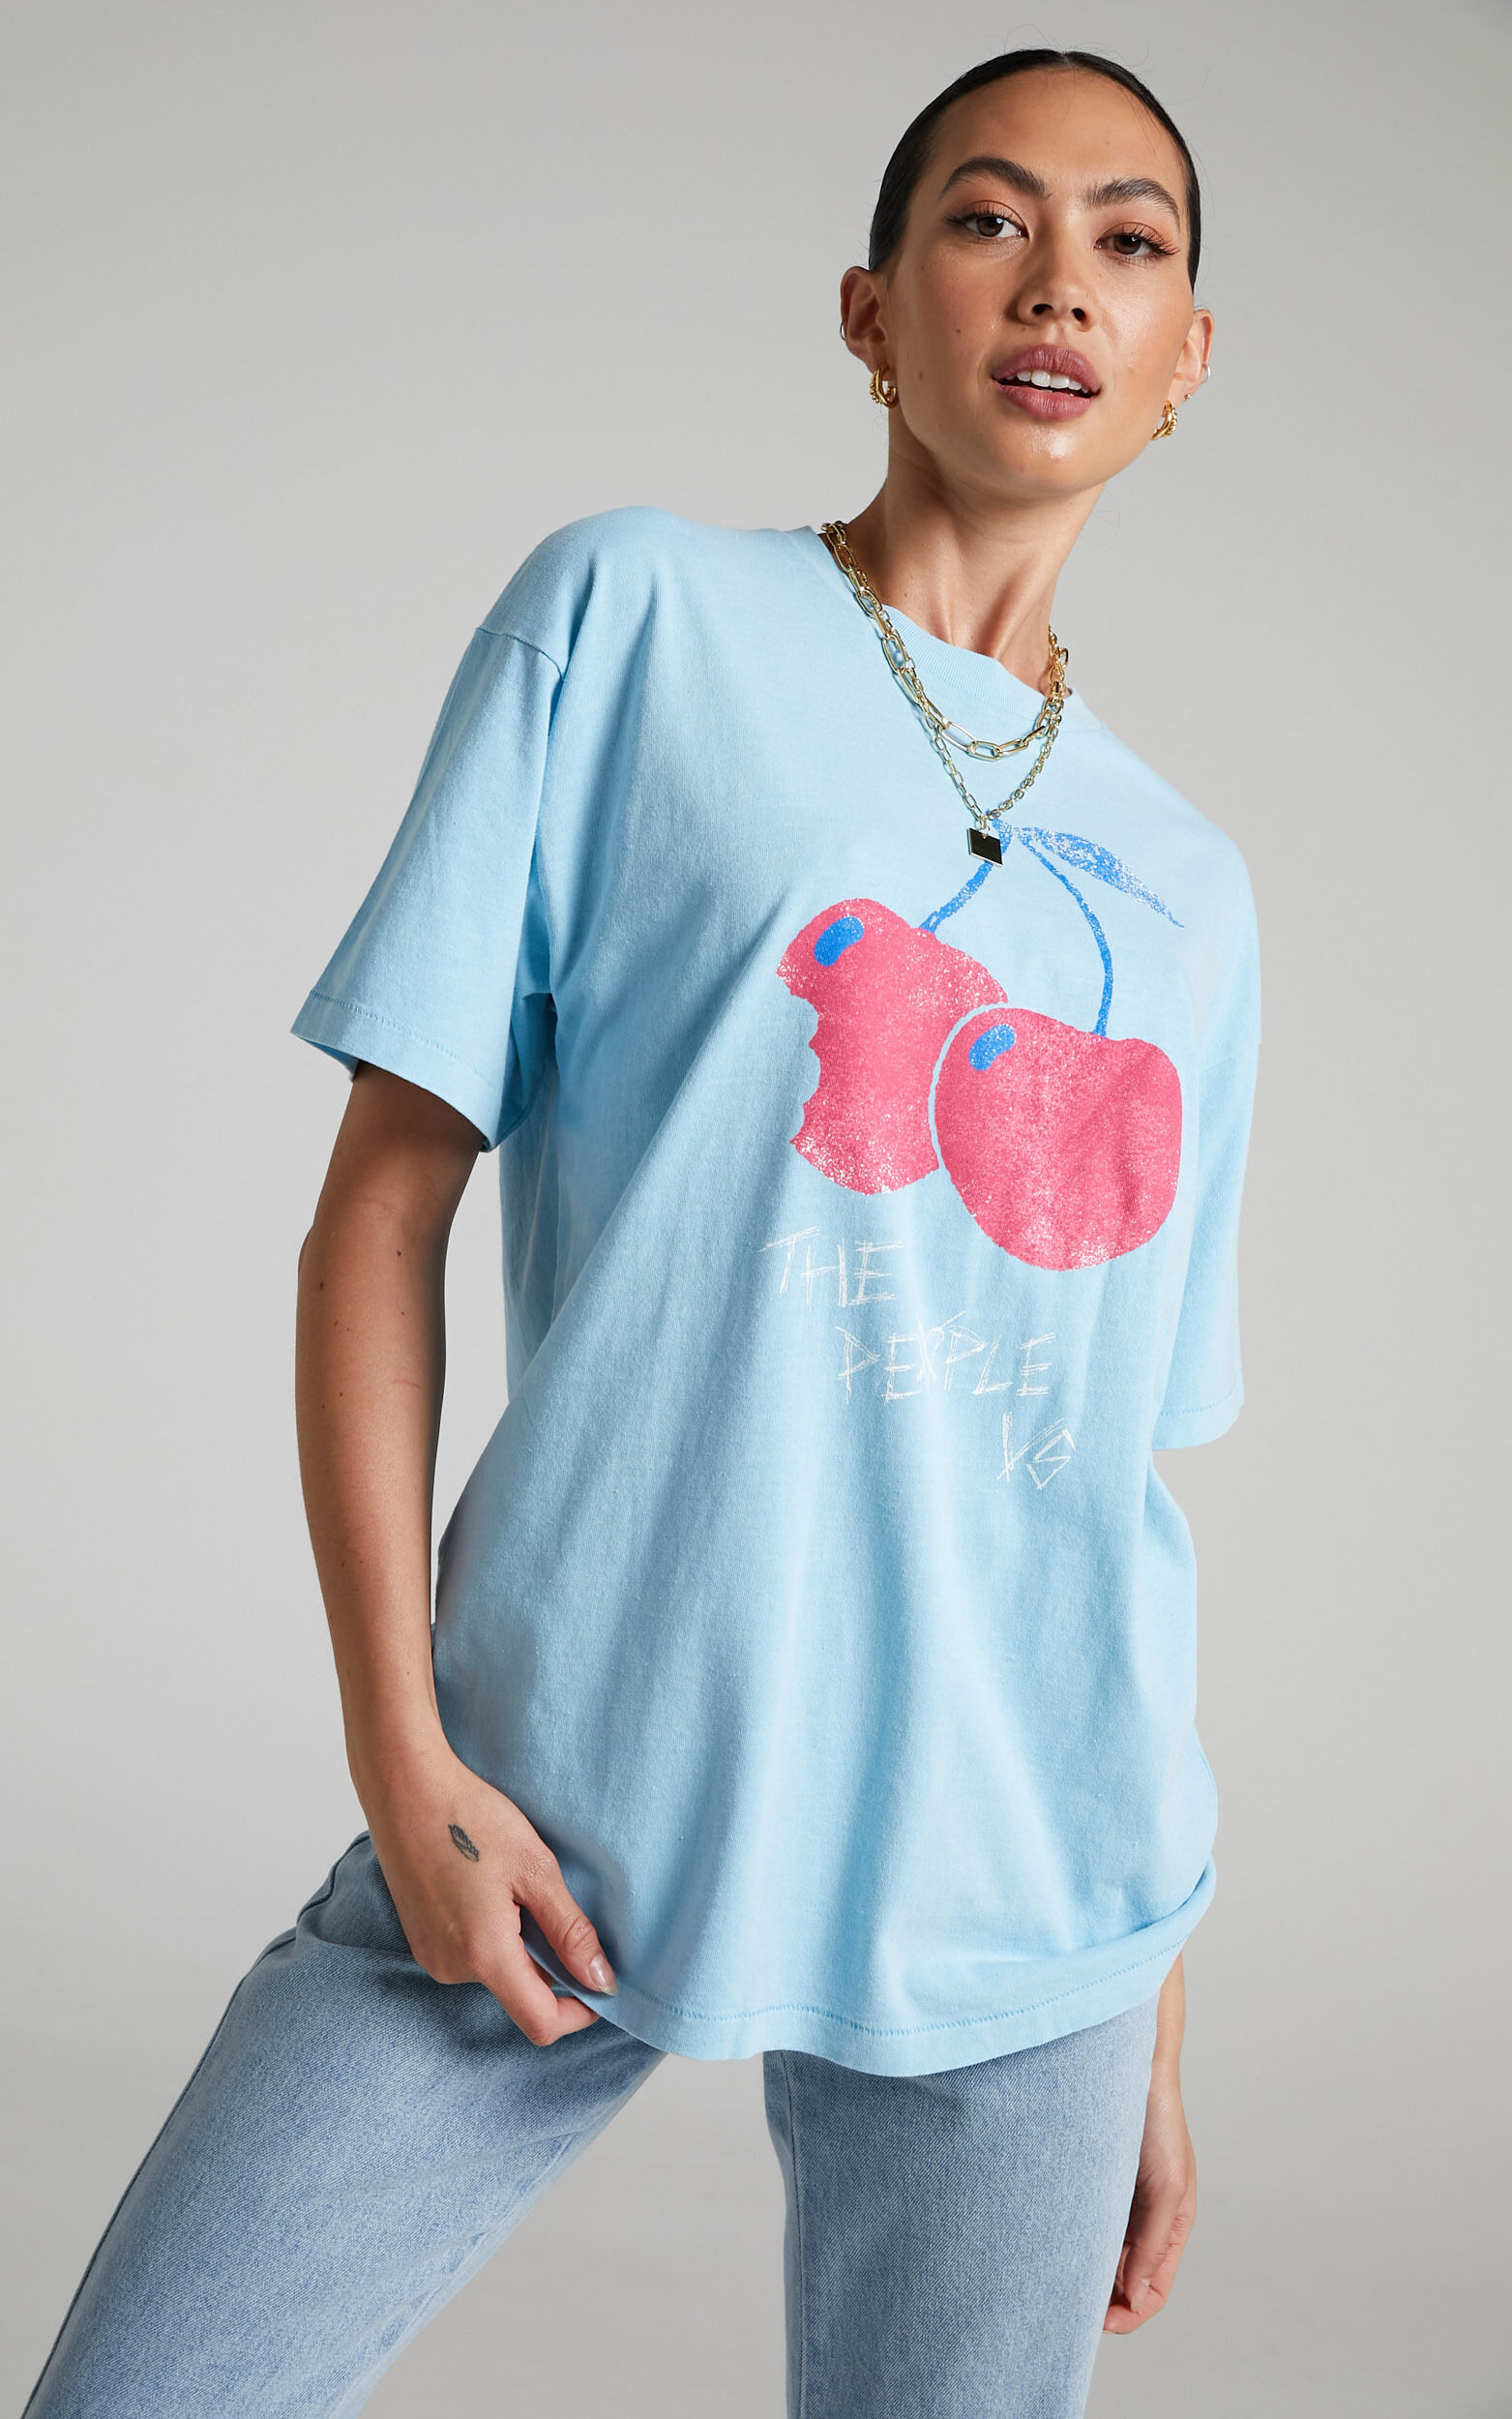 The People Vs - Sour Cherry Boyfriend Tee in Dusty Blue - XS, BLU1, super-hi-res image number null